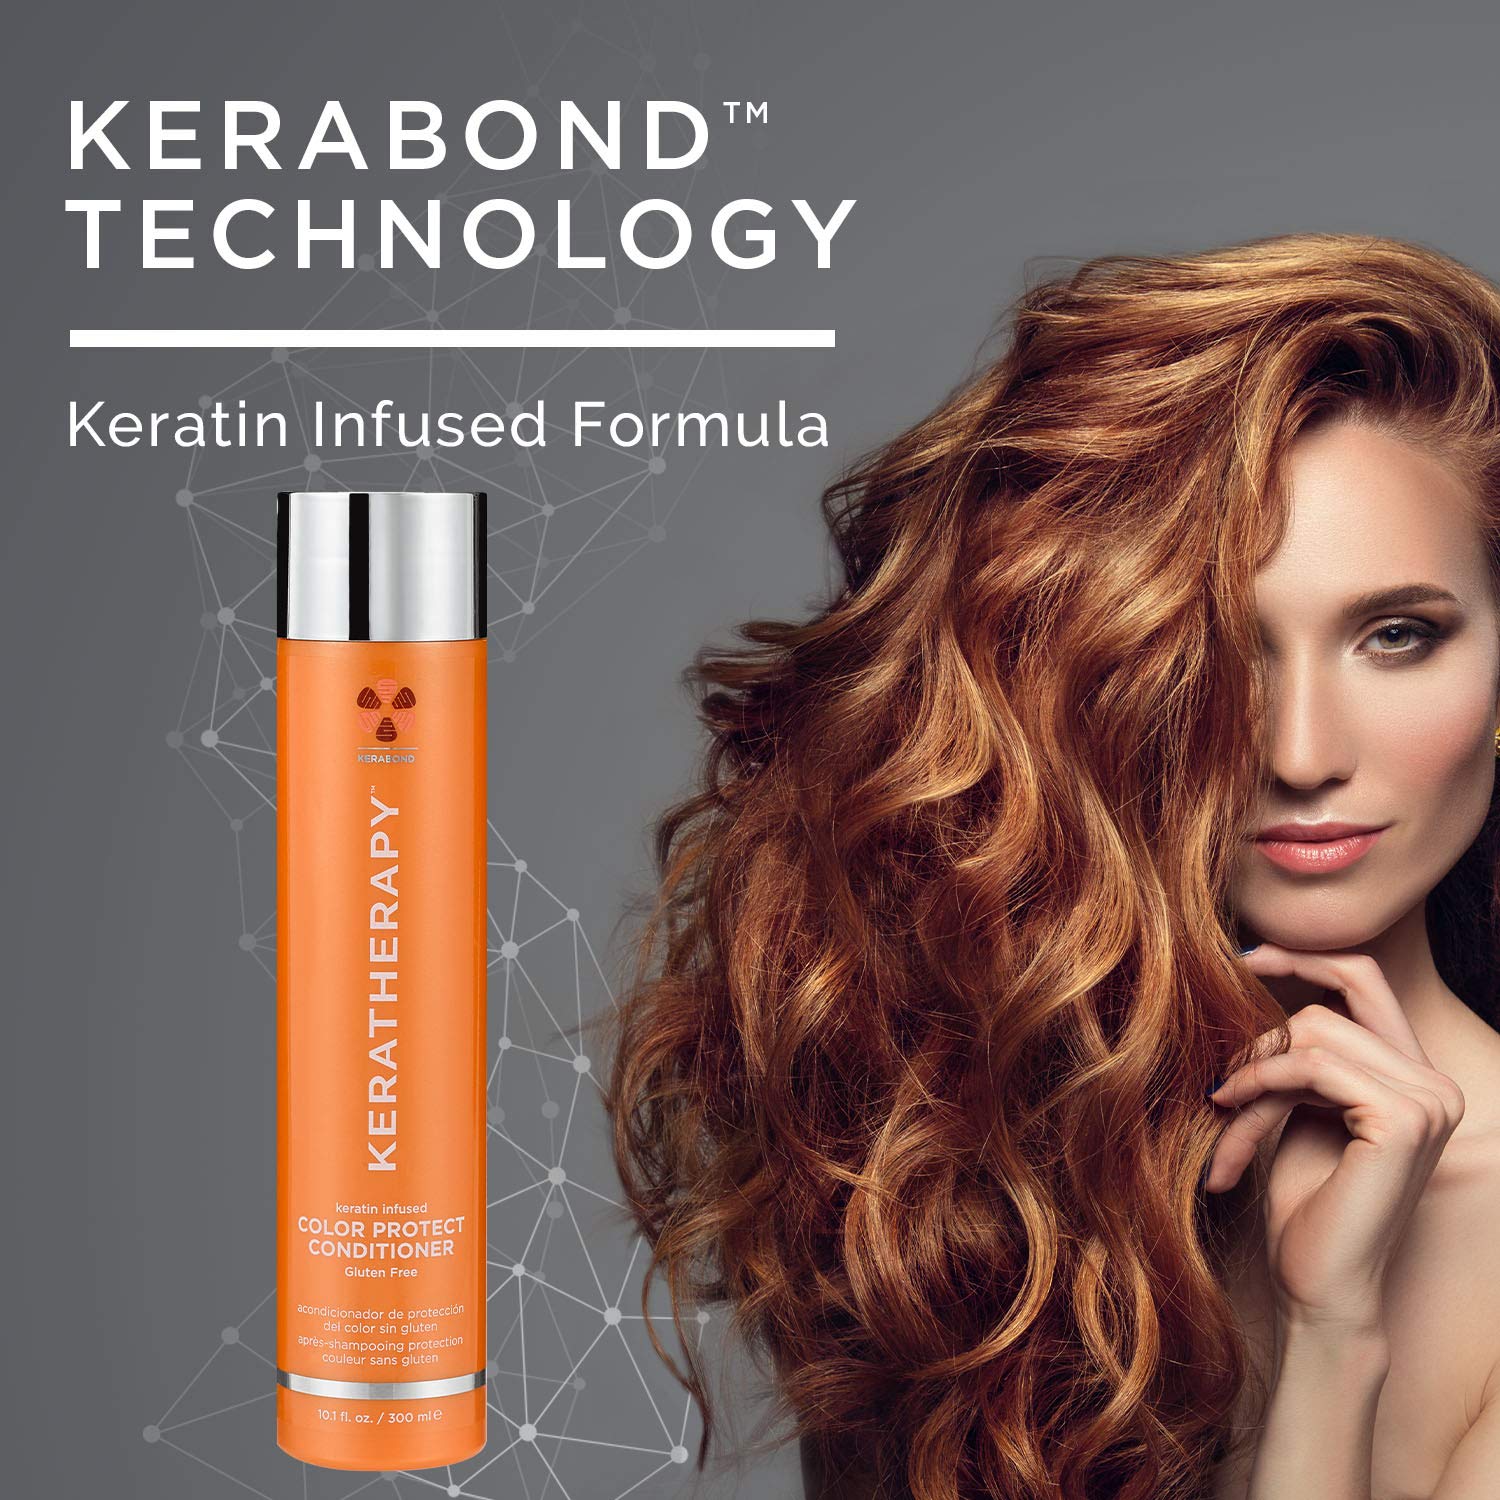 KERATHERAPY Keratin Infused Color Protect Conditioner, 10.1 fl. oz., 300 ml - Gluten Free Color Protecting Conditioner for Color Treated Hair with Kerabond Technology, Red Raspberry Oil, Omega 3 & 6